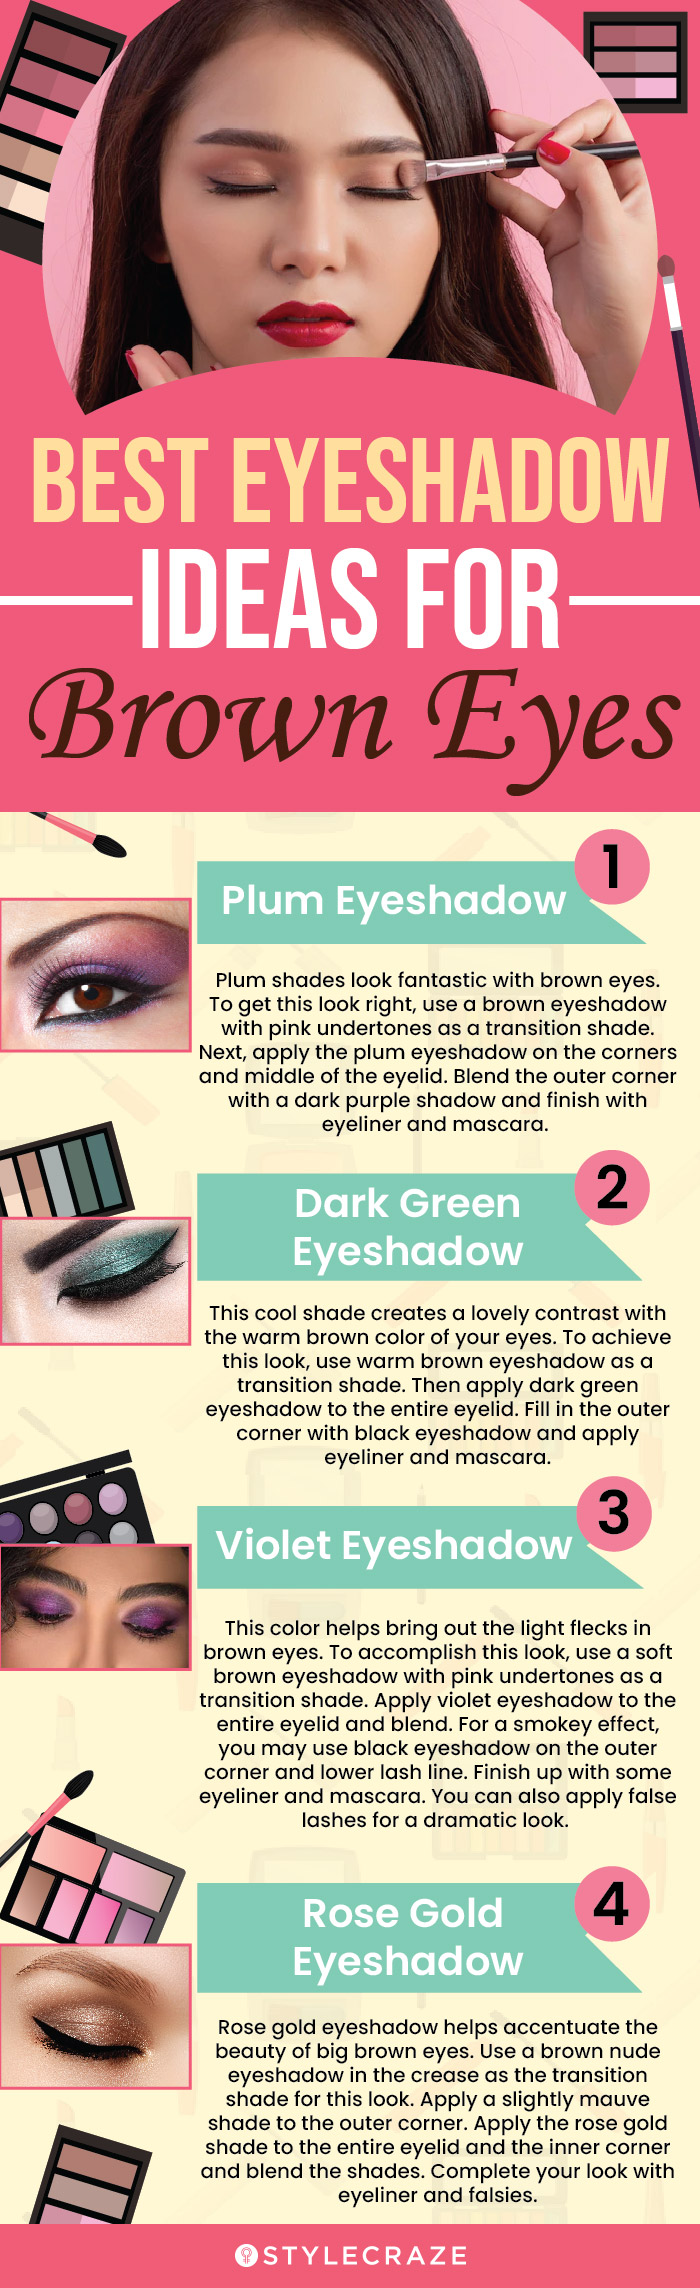 Eye Makeup For Brown Eyes: 10 Stunning Tutorials And 6 Simple Tips